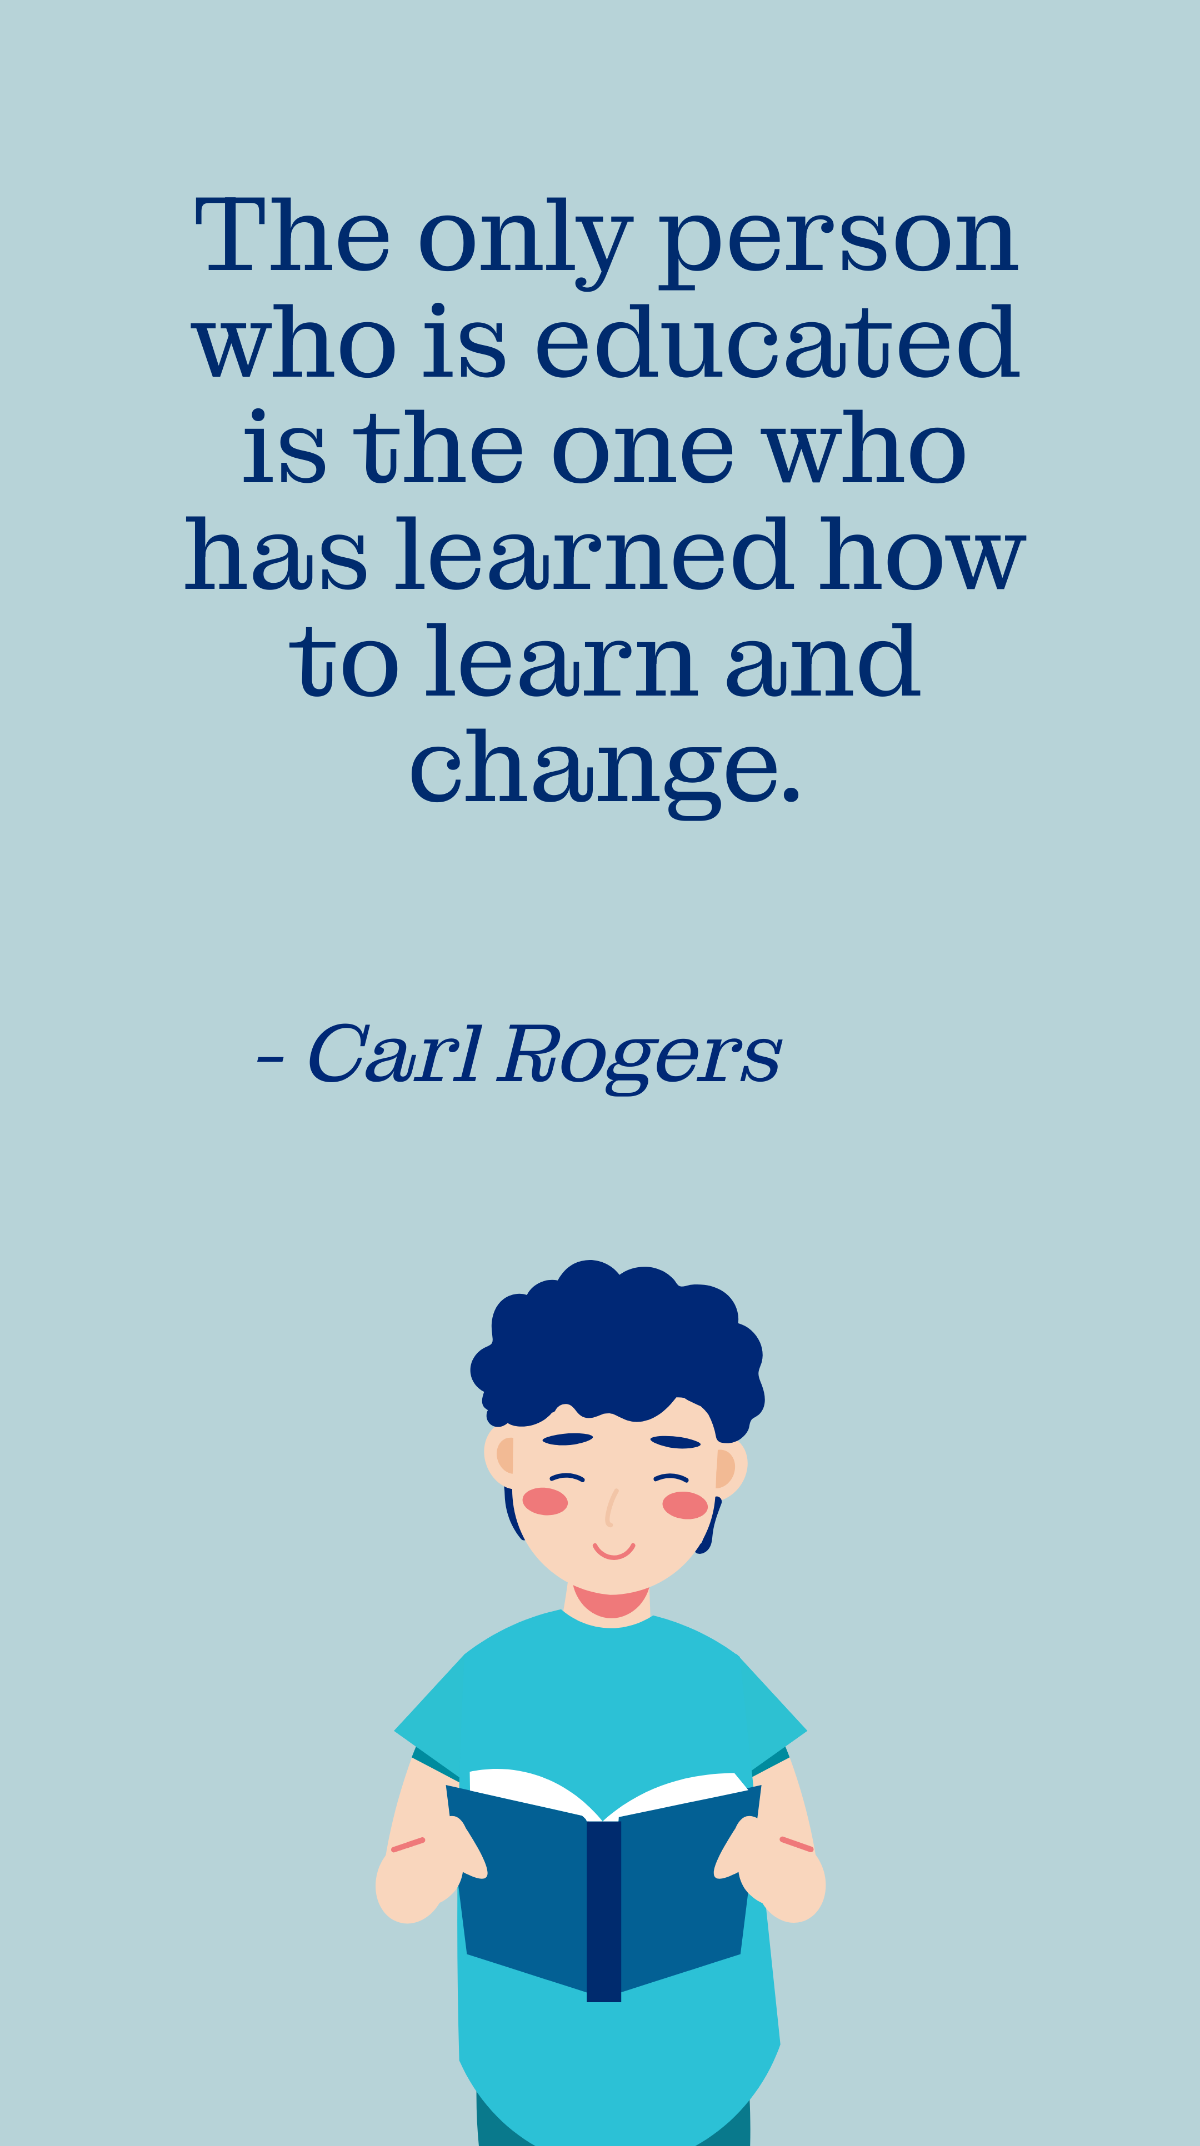 Carl Rogers - The only person who is educated is the one who has learned how to learn and change. Template